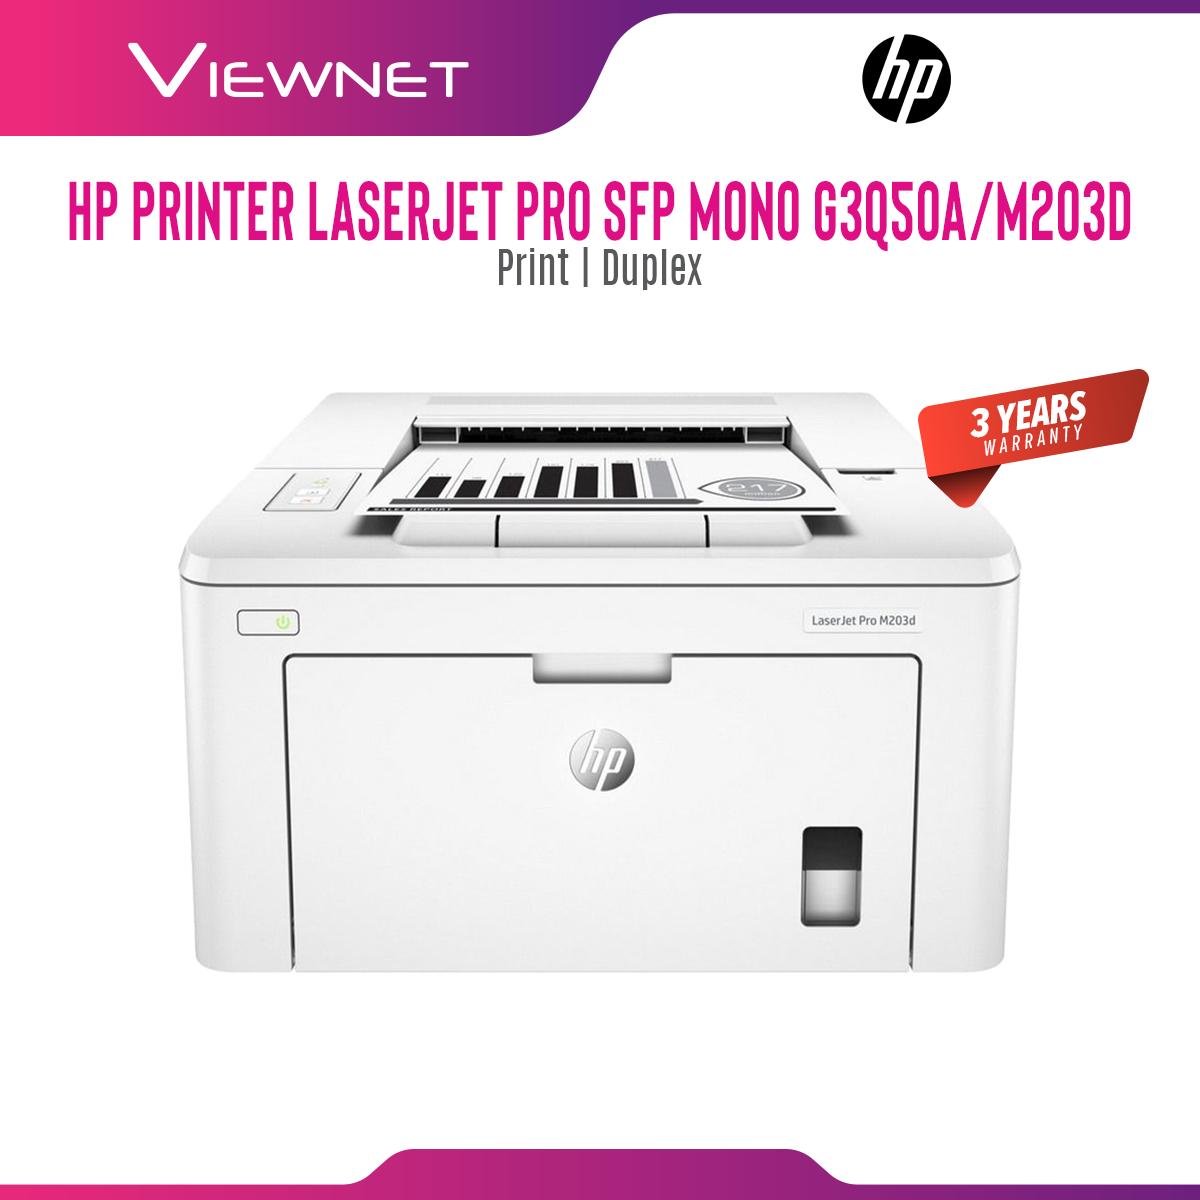 HP LaserJet Pro M203d Printer (Duplex Printing) 3 Years Onsite Warranty with 1-to-1 Unit exchange **NEED TO ONLINE REGISTER**